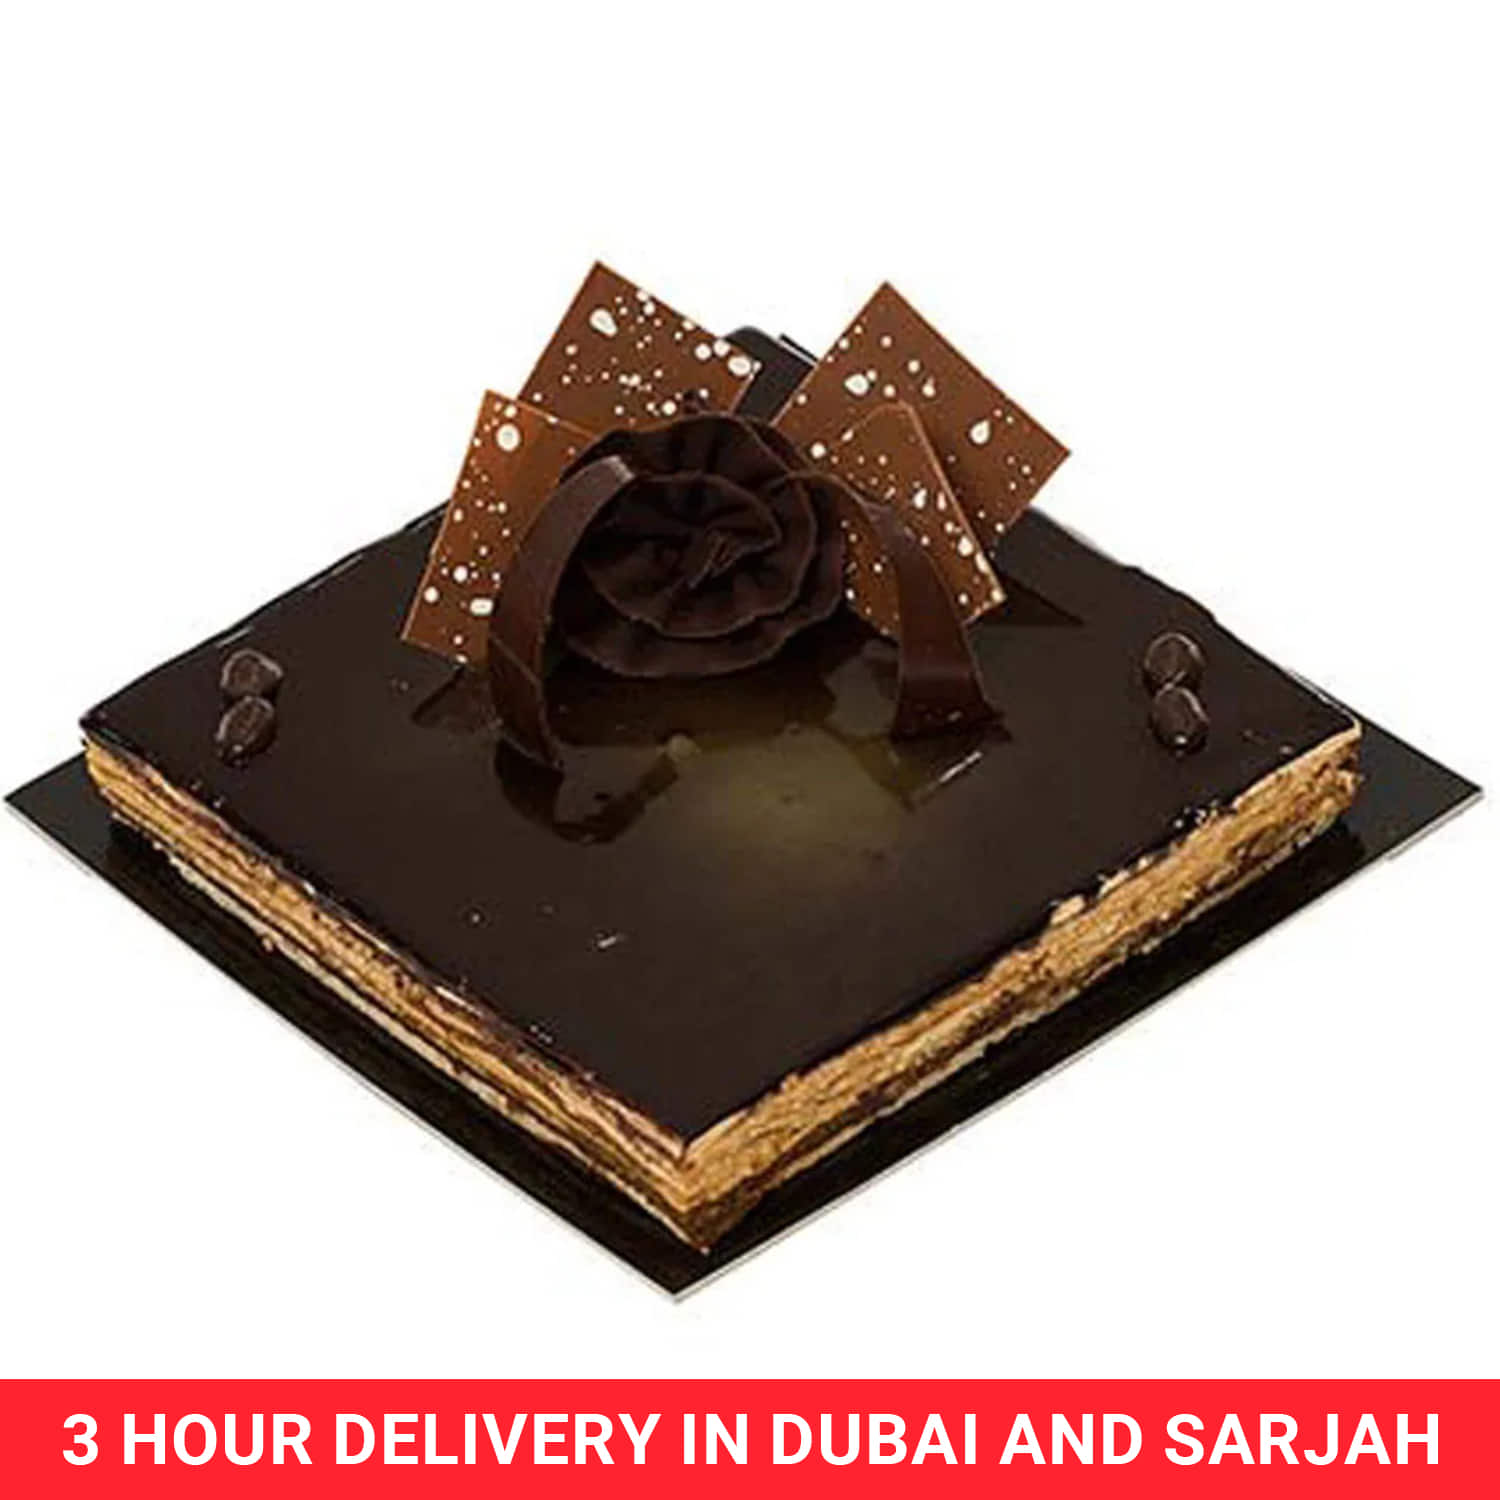 Online Gift Delivery in Dubai - GiftBag.ae - Online Gift Delivery in Dubai